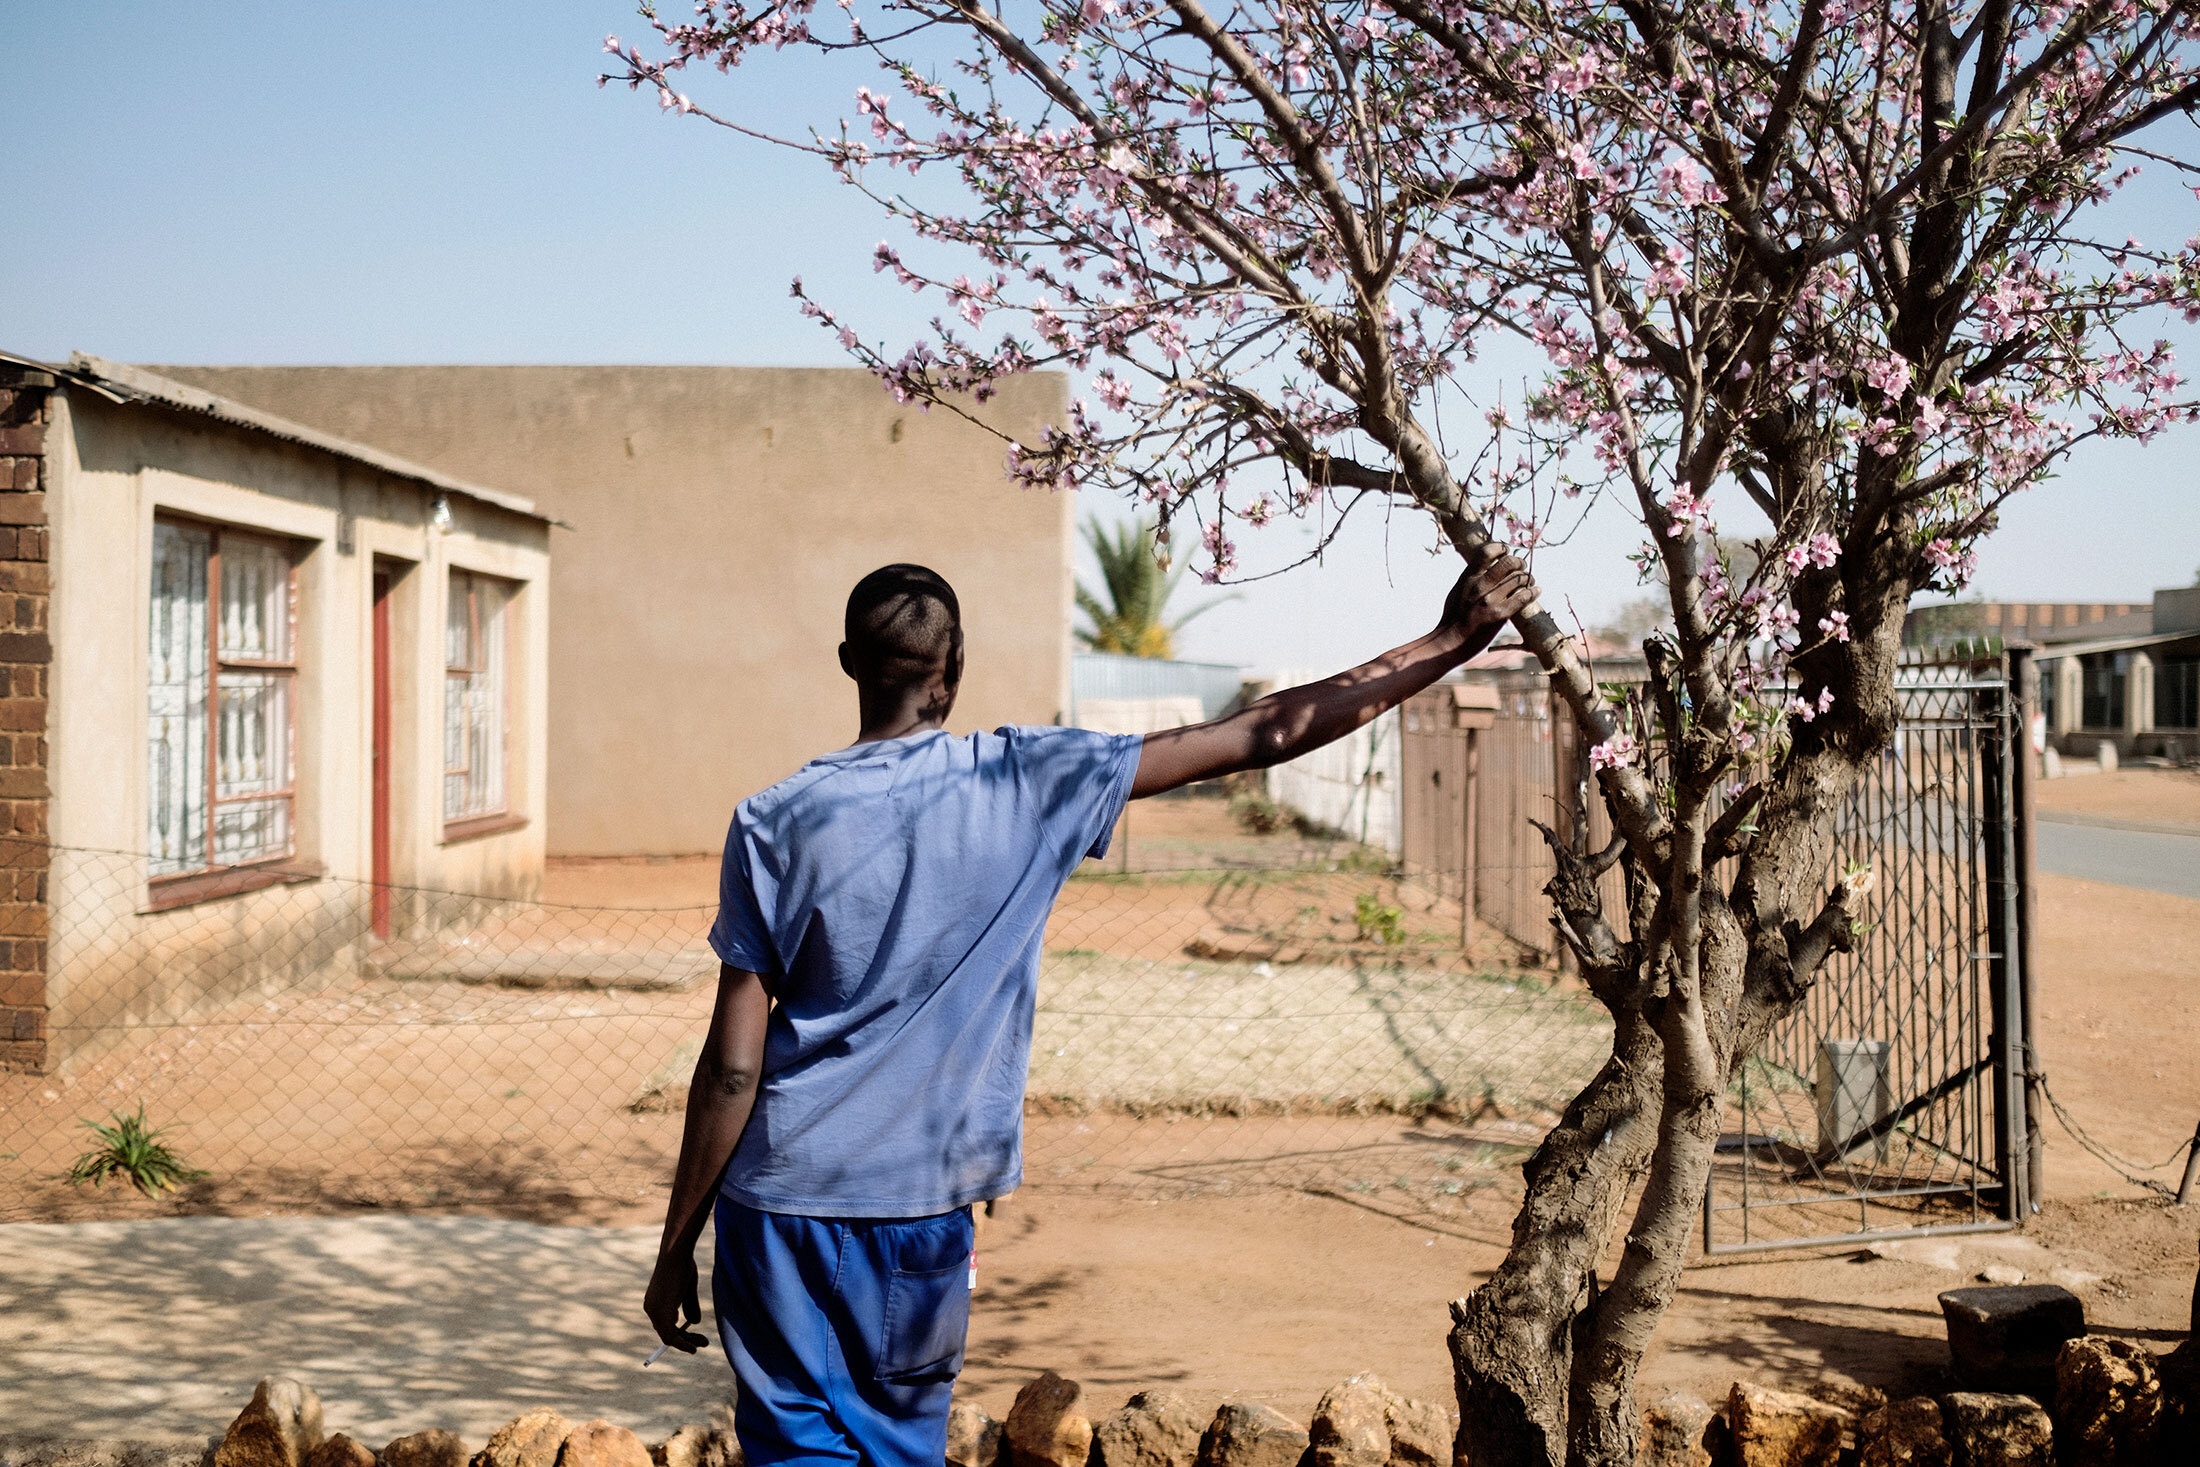 Lindokuhle Sobekwa’s photograph ‘Mzwandile on rehabilitation’ (2019) depicts a person standing in a house’s front yard steadying themselves against a tree branch.
